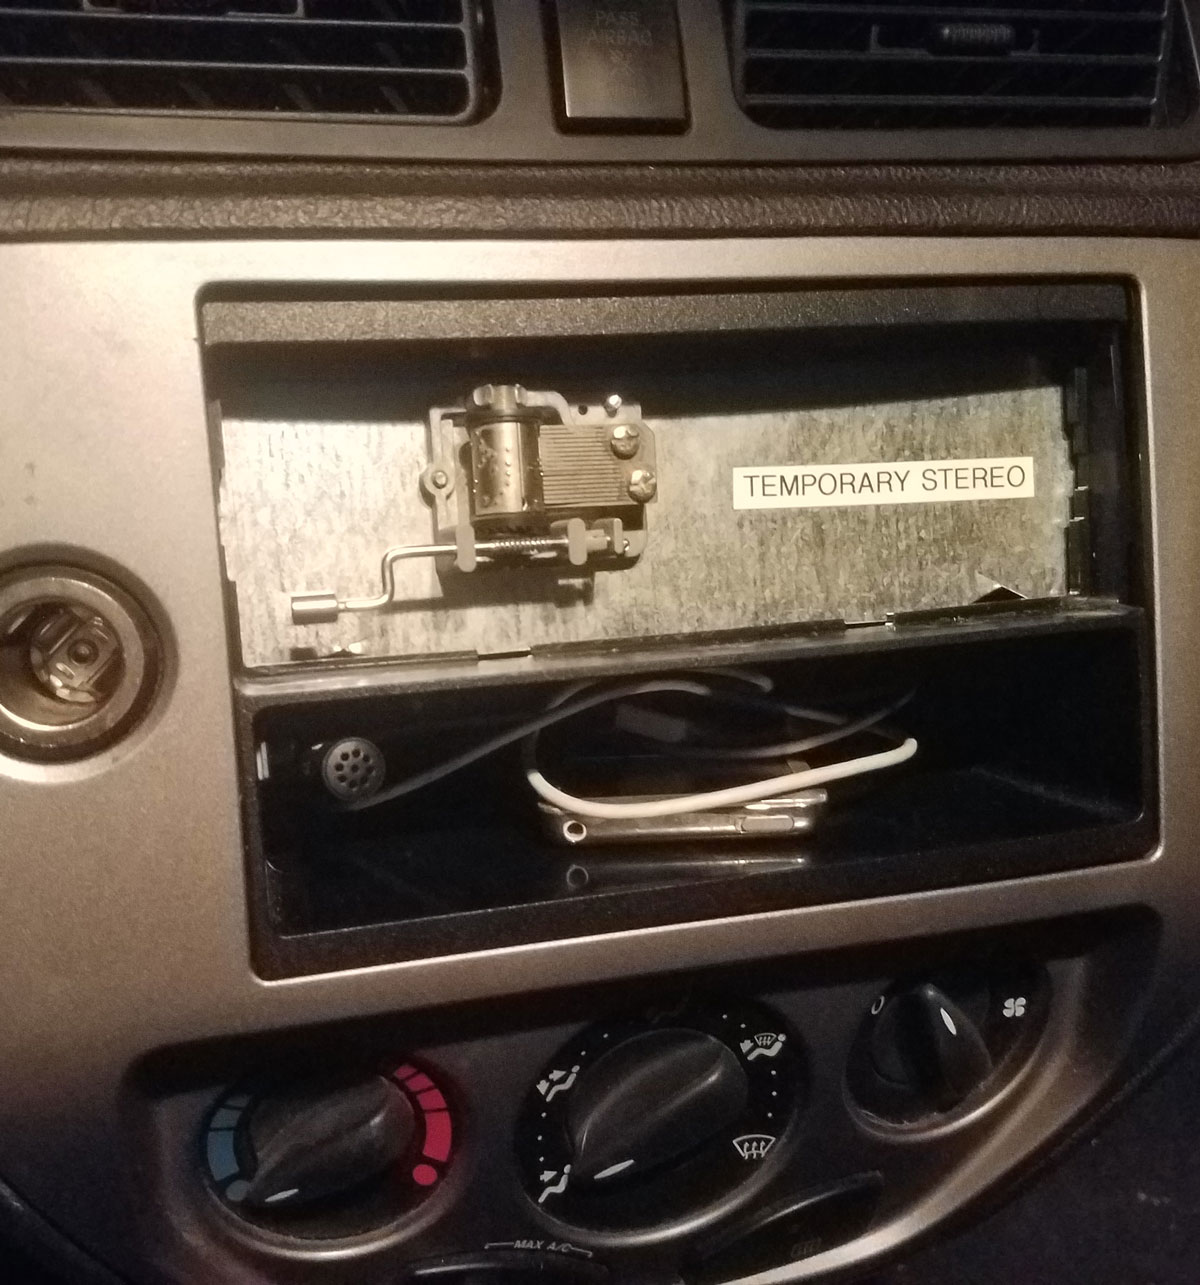 Sent the wife's car stereo off for a replacement. She'll have to live with this until then